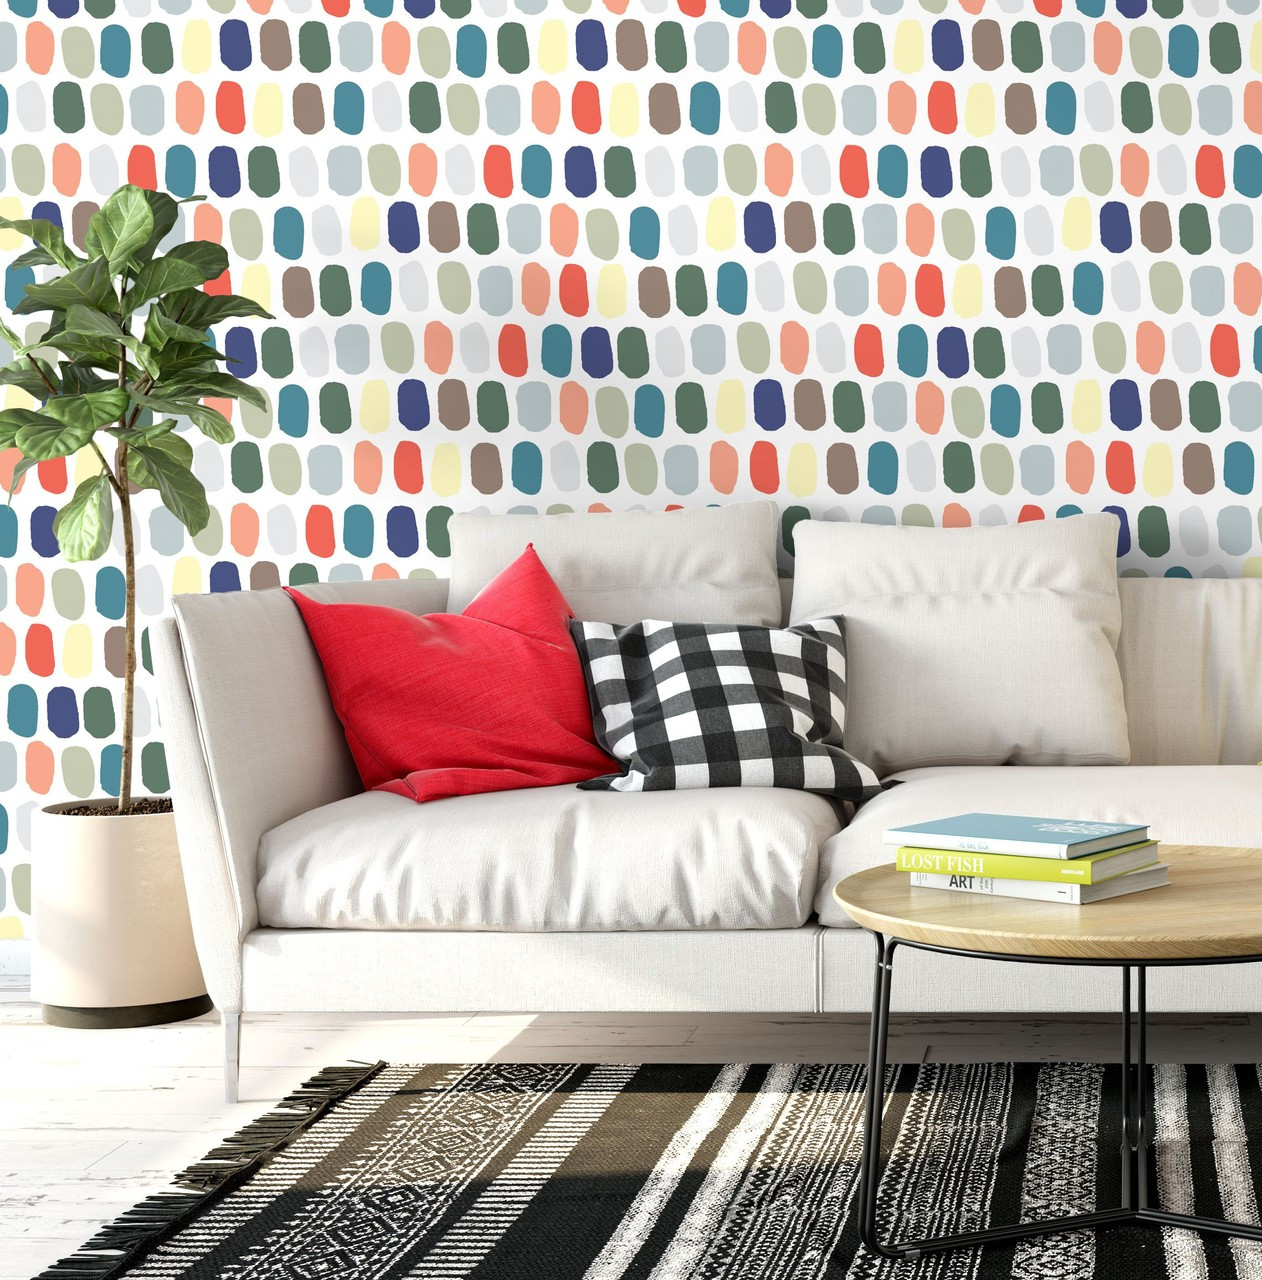 Buy Colorful Geometric Pattern D2 NonPVC SelfAdhesive Peel  Stick Vinyl  Wallpaper Roll Cover 36 sqft Area Online in India at Best Price  Modern  WallPaper  Wall Arts  Home Decor 